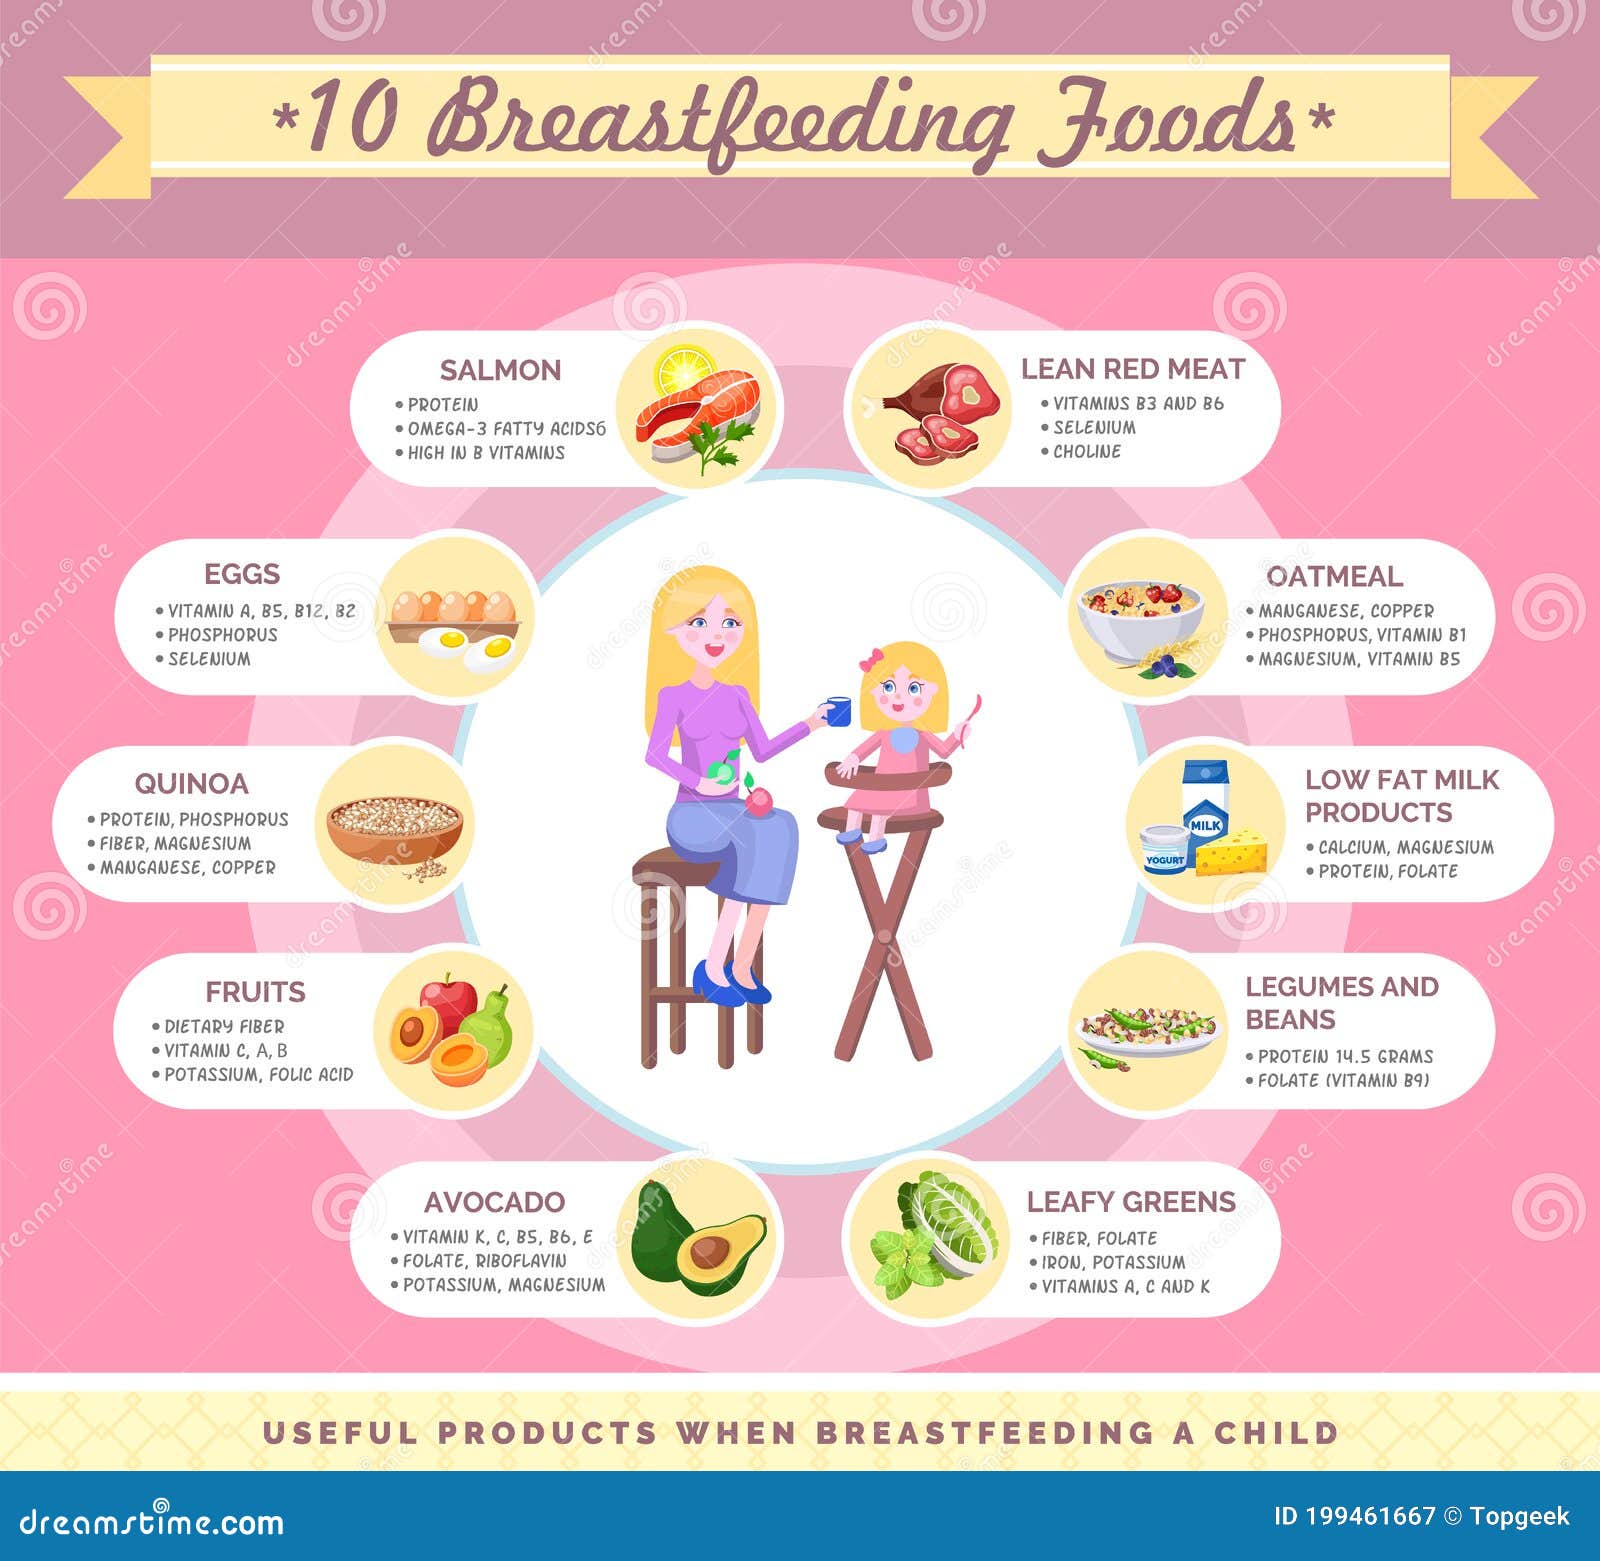 presentation-template-useful-products-when-breastfeeding-a-child-foods